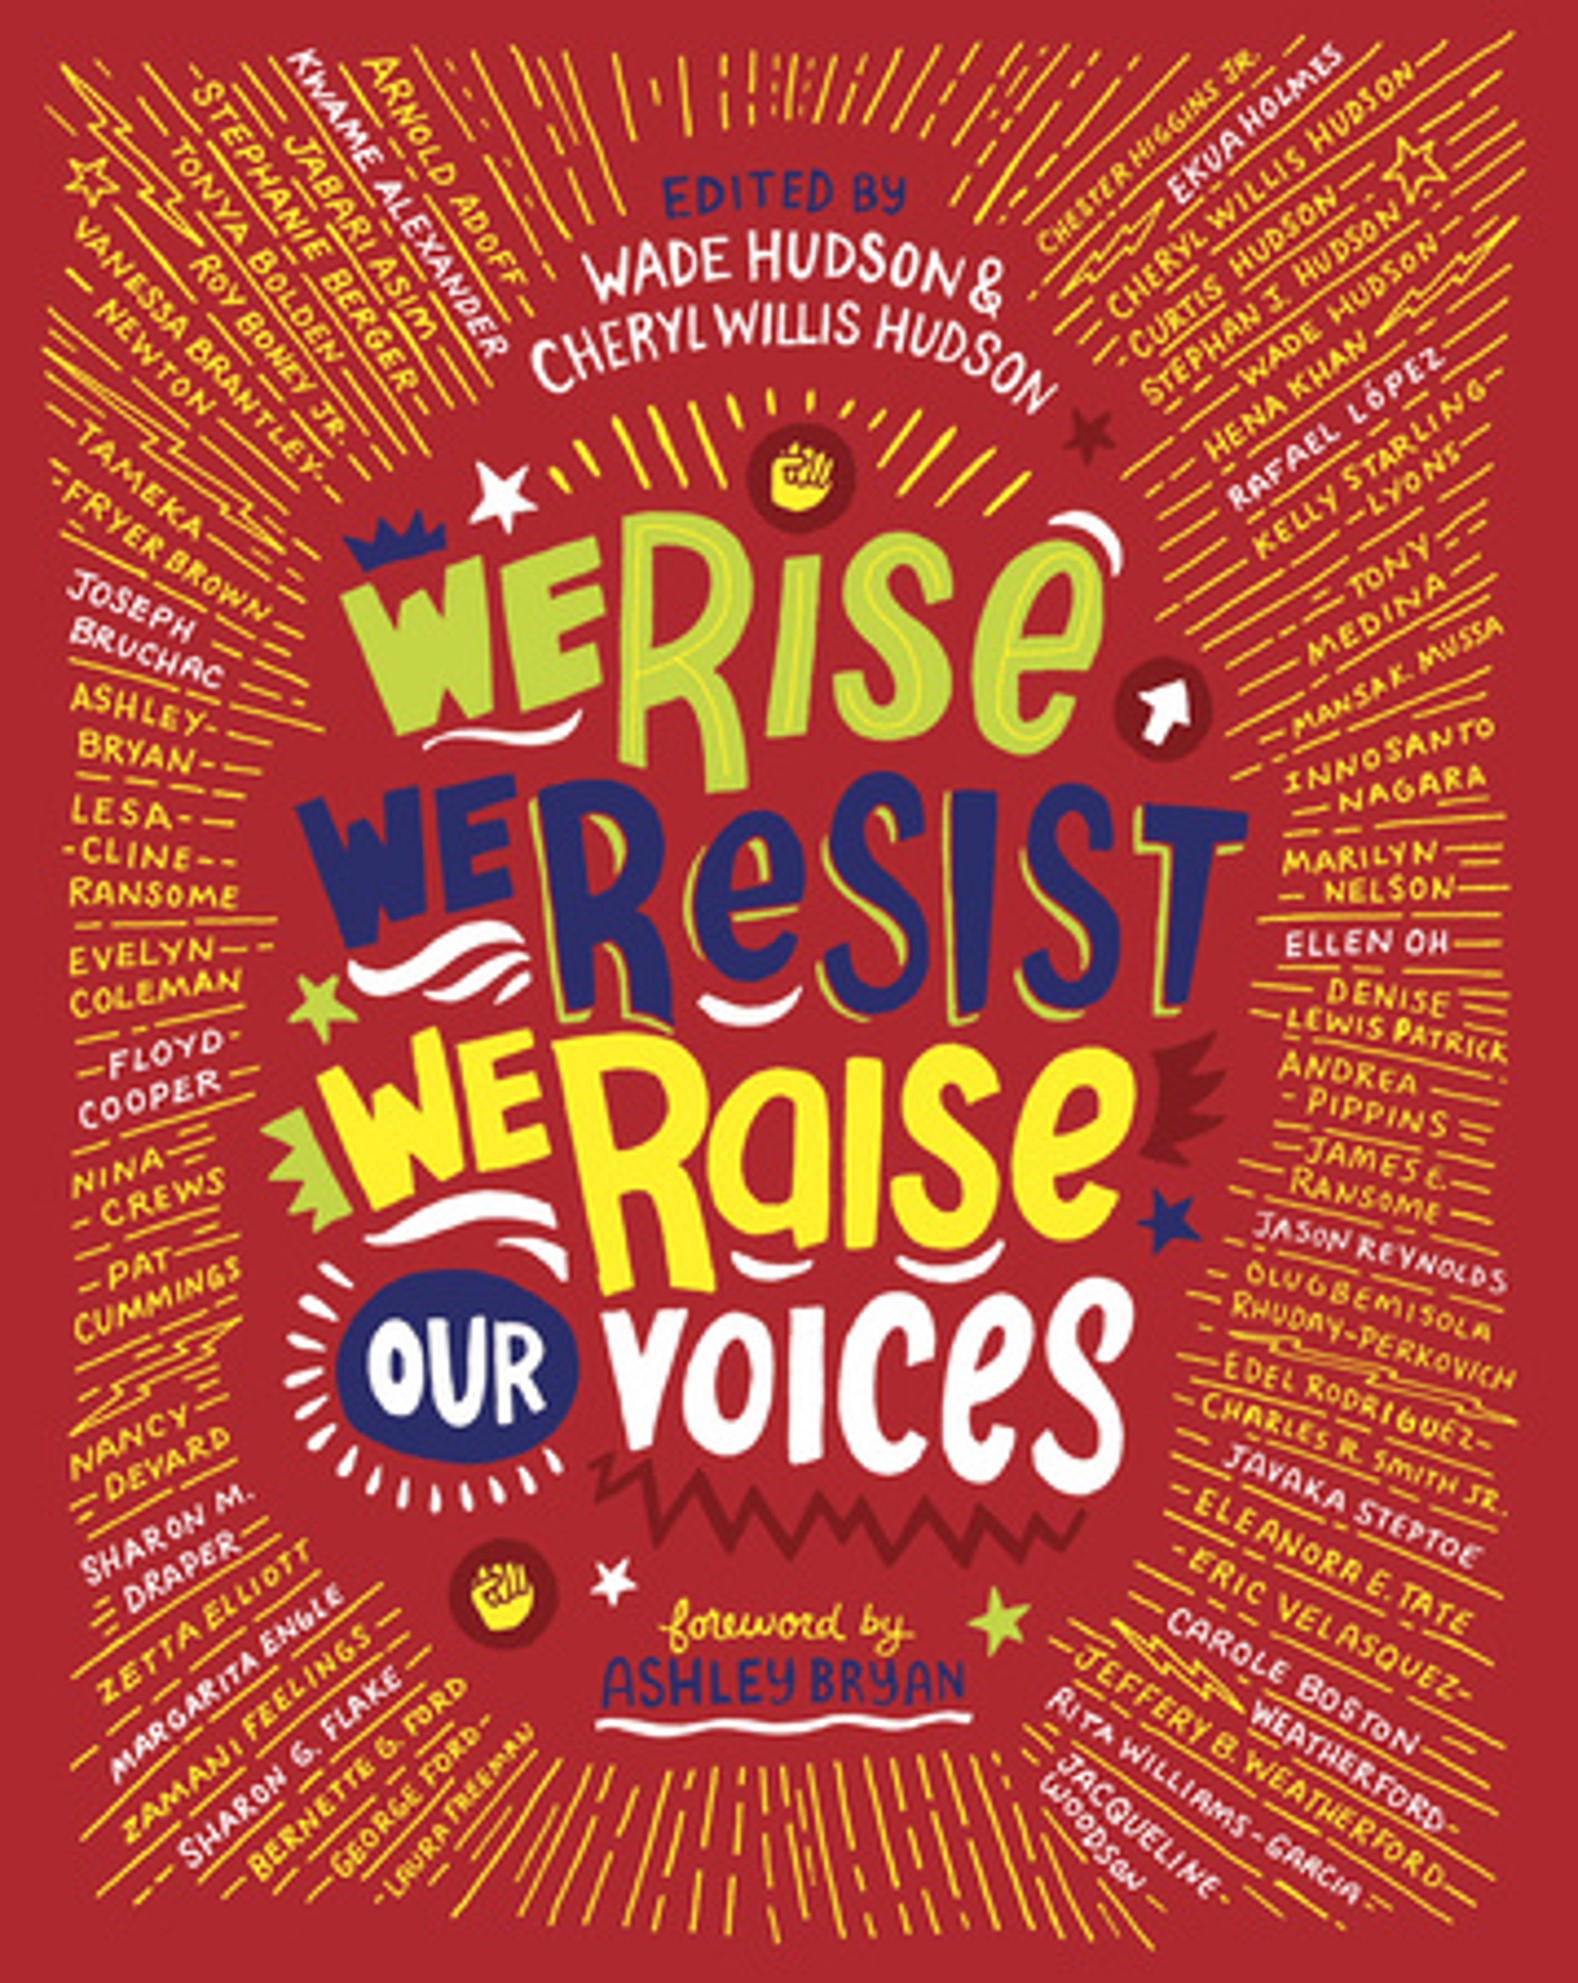 Book cover of We Rise, We Resist, We Raise Our Voices.